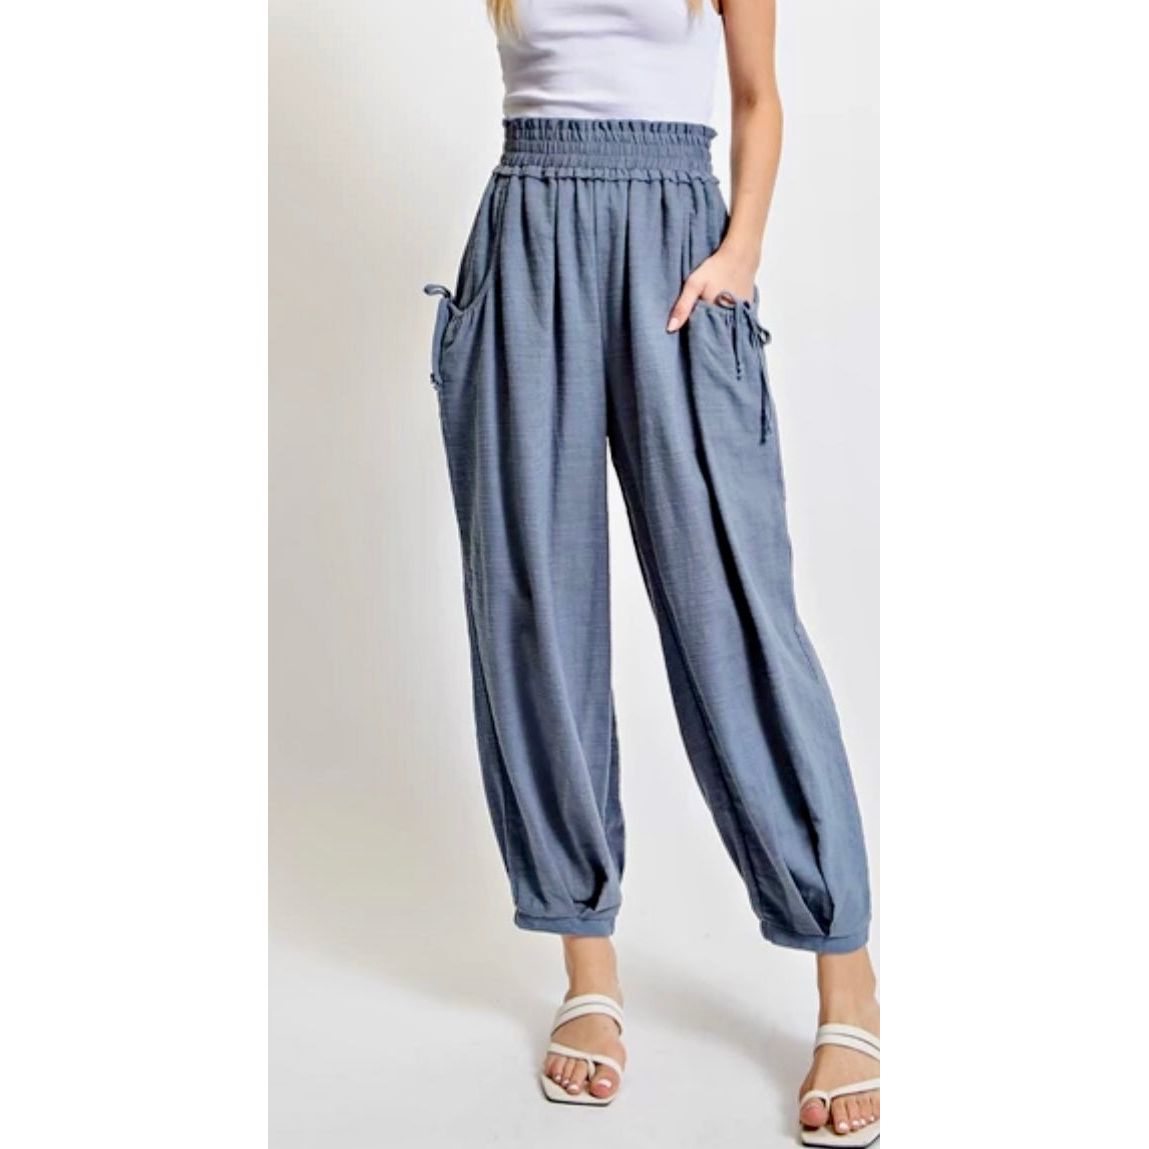 Ramona Cotton Pants With Side Pockets- 2 Colors